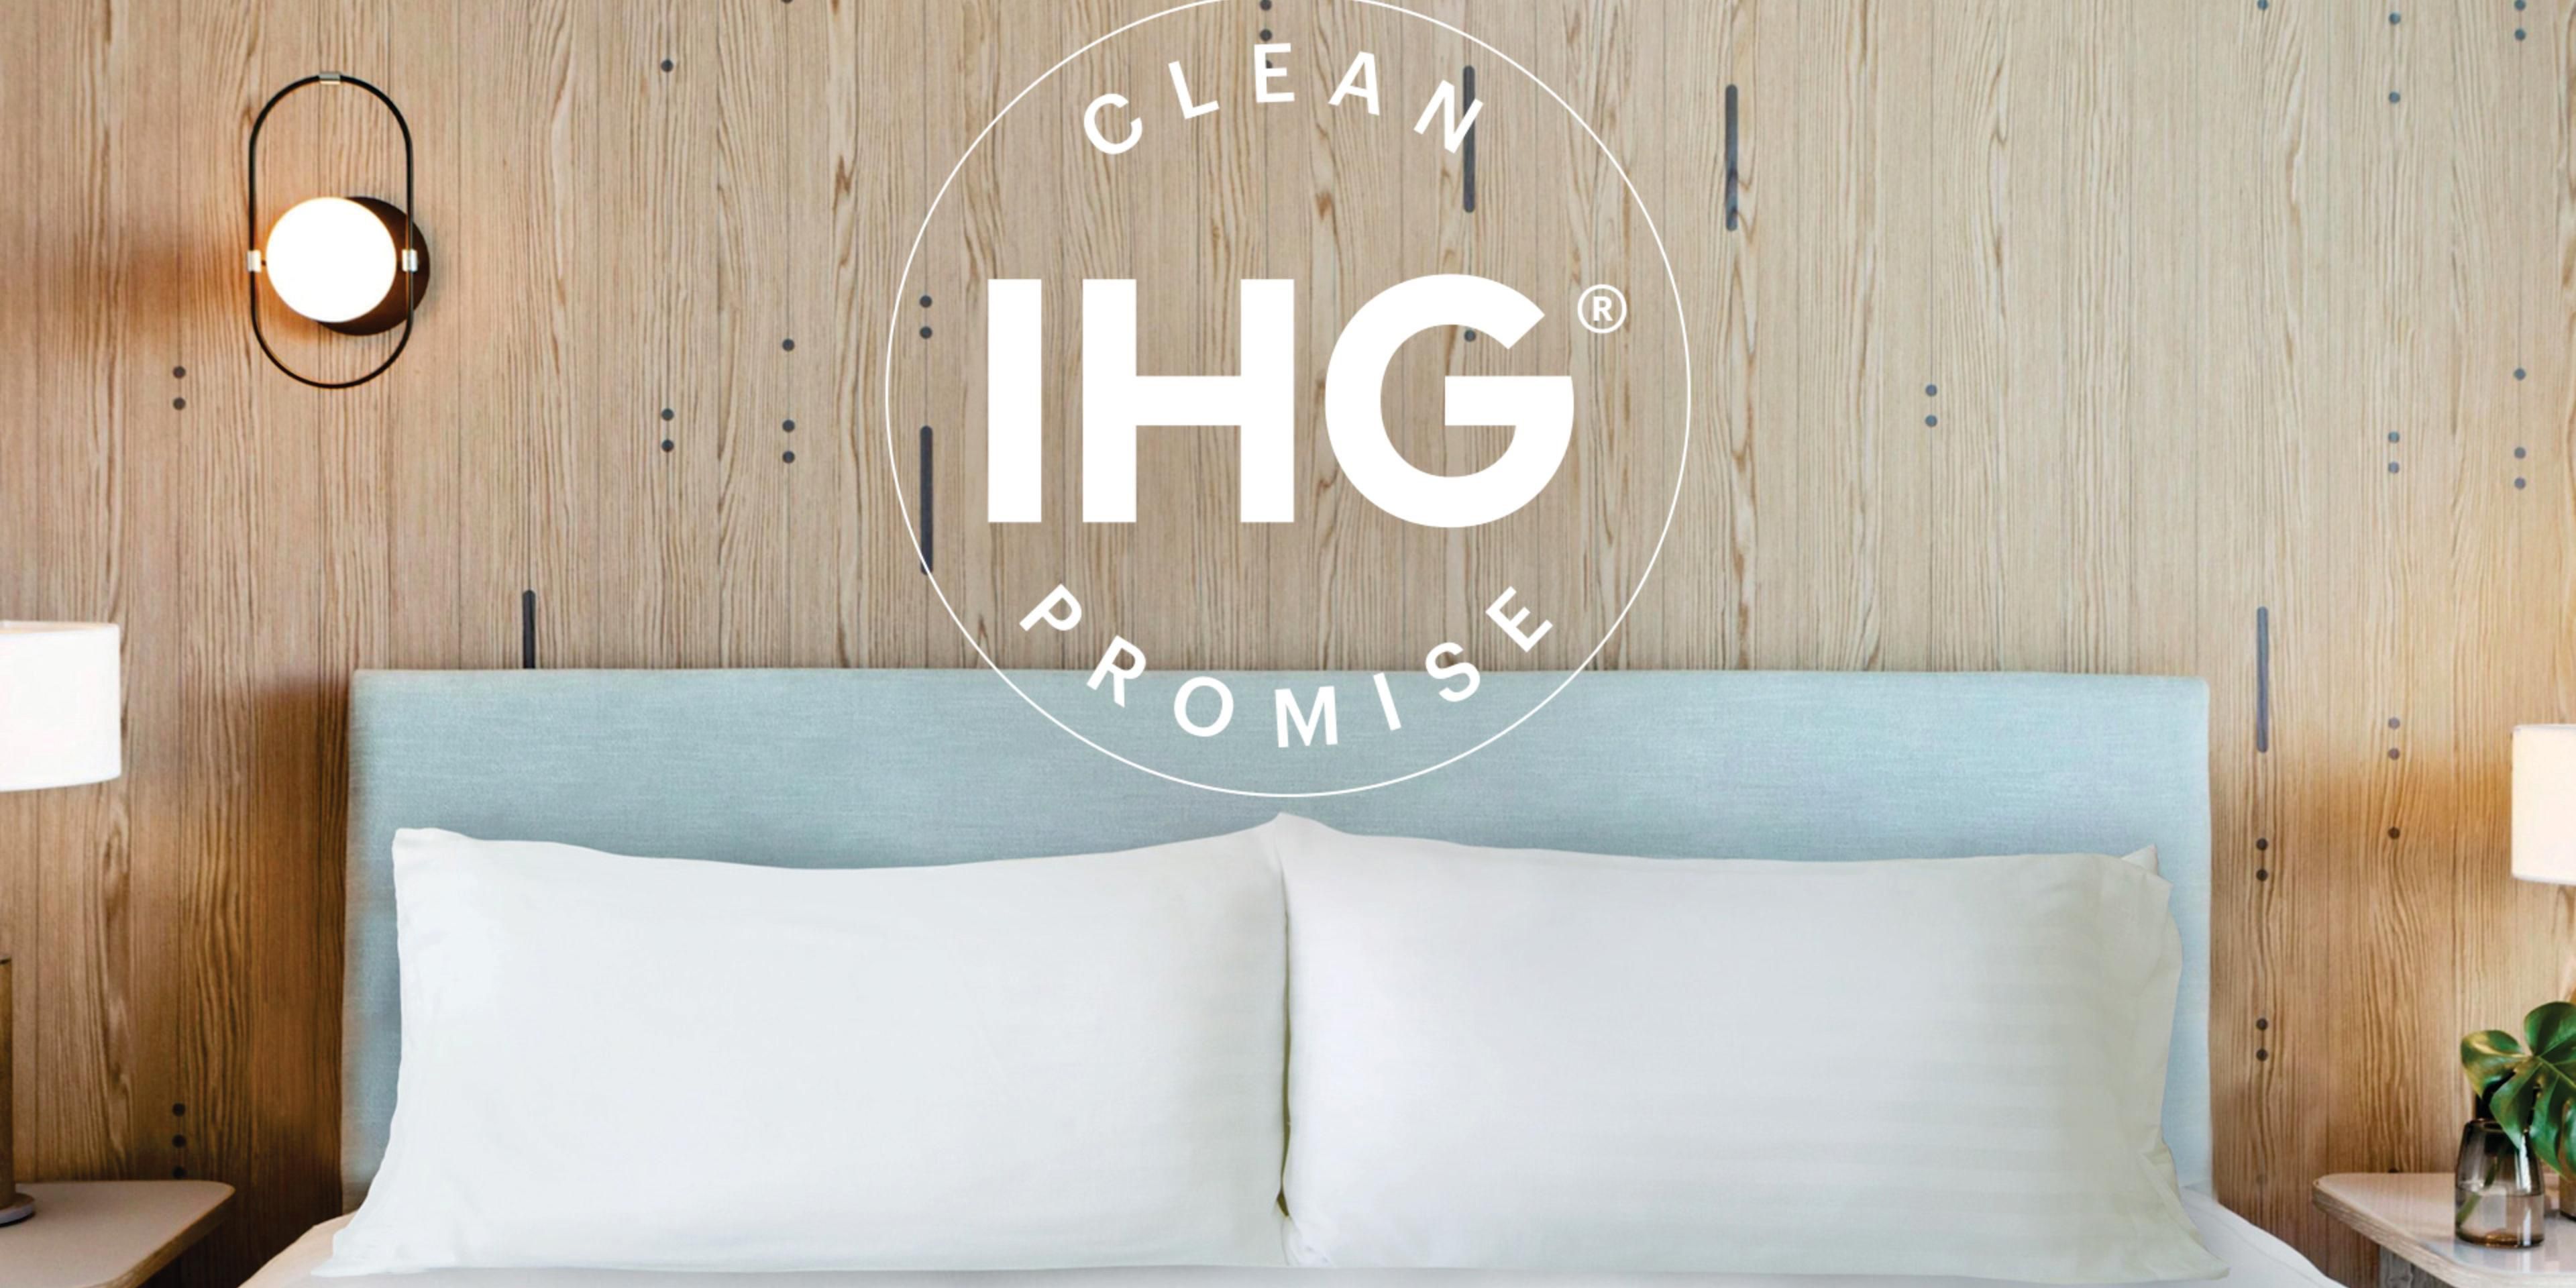 IHG has a long standing commitment to rigorous cleaning procedures. This IHG Way of Clean program is now being
expanded with additional COVID-19 protocols and best practices.